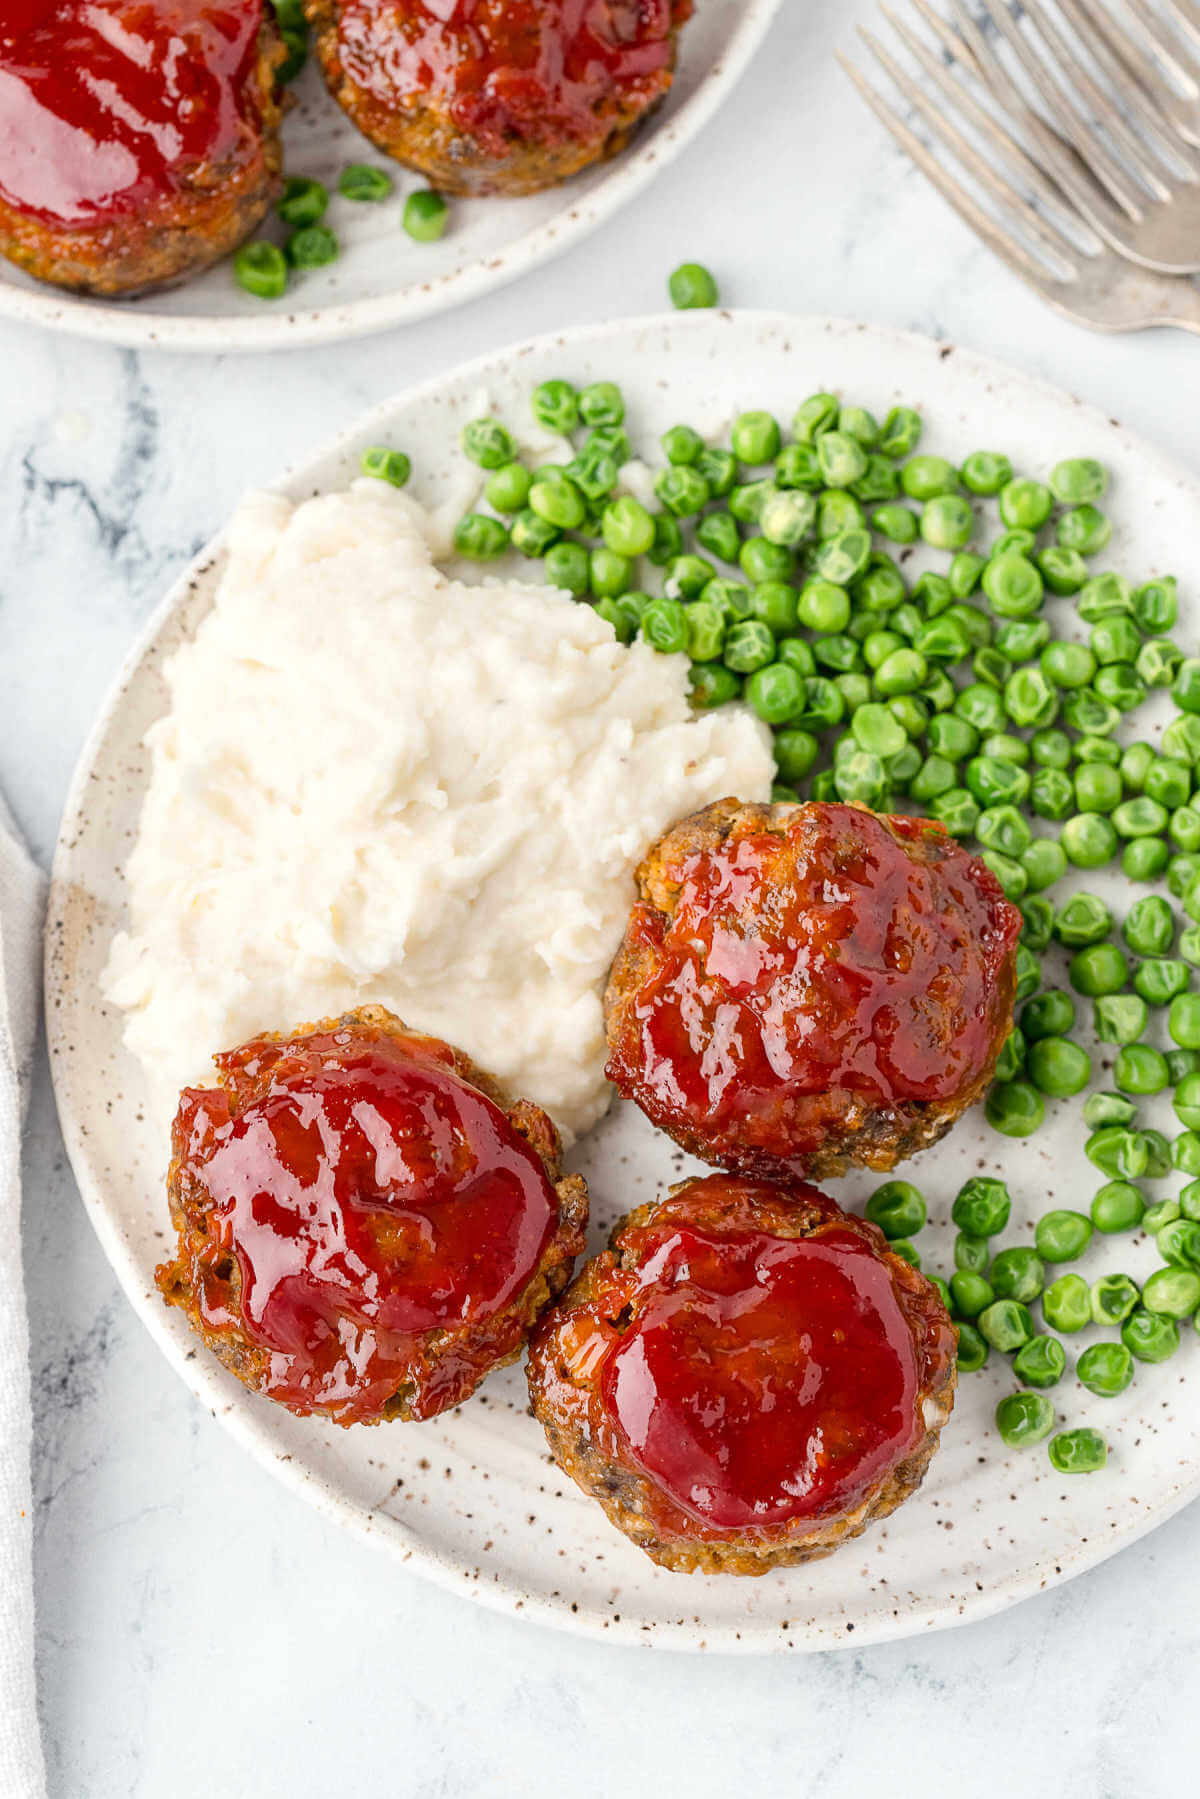 three meatloaf muffins on a plate with mashed potatoes and peas on a table.